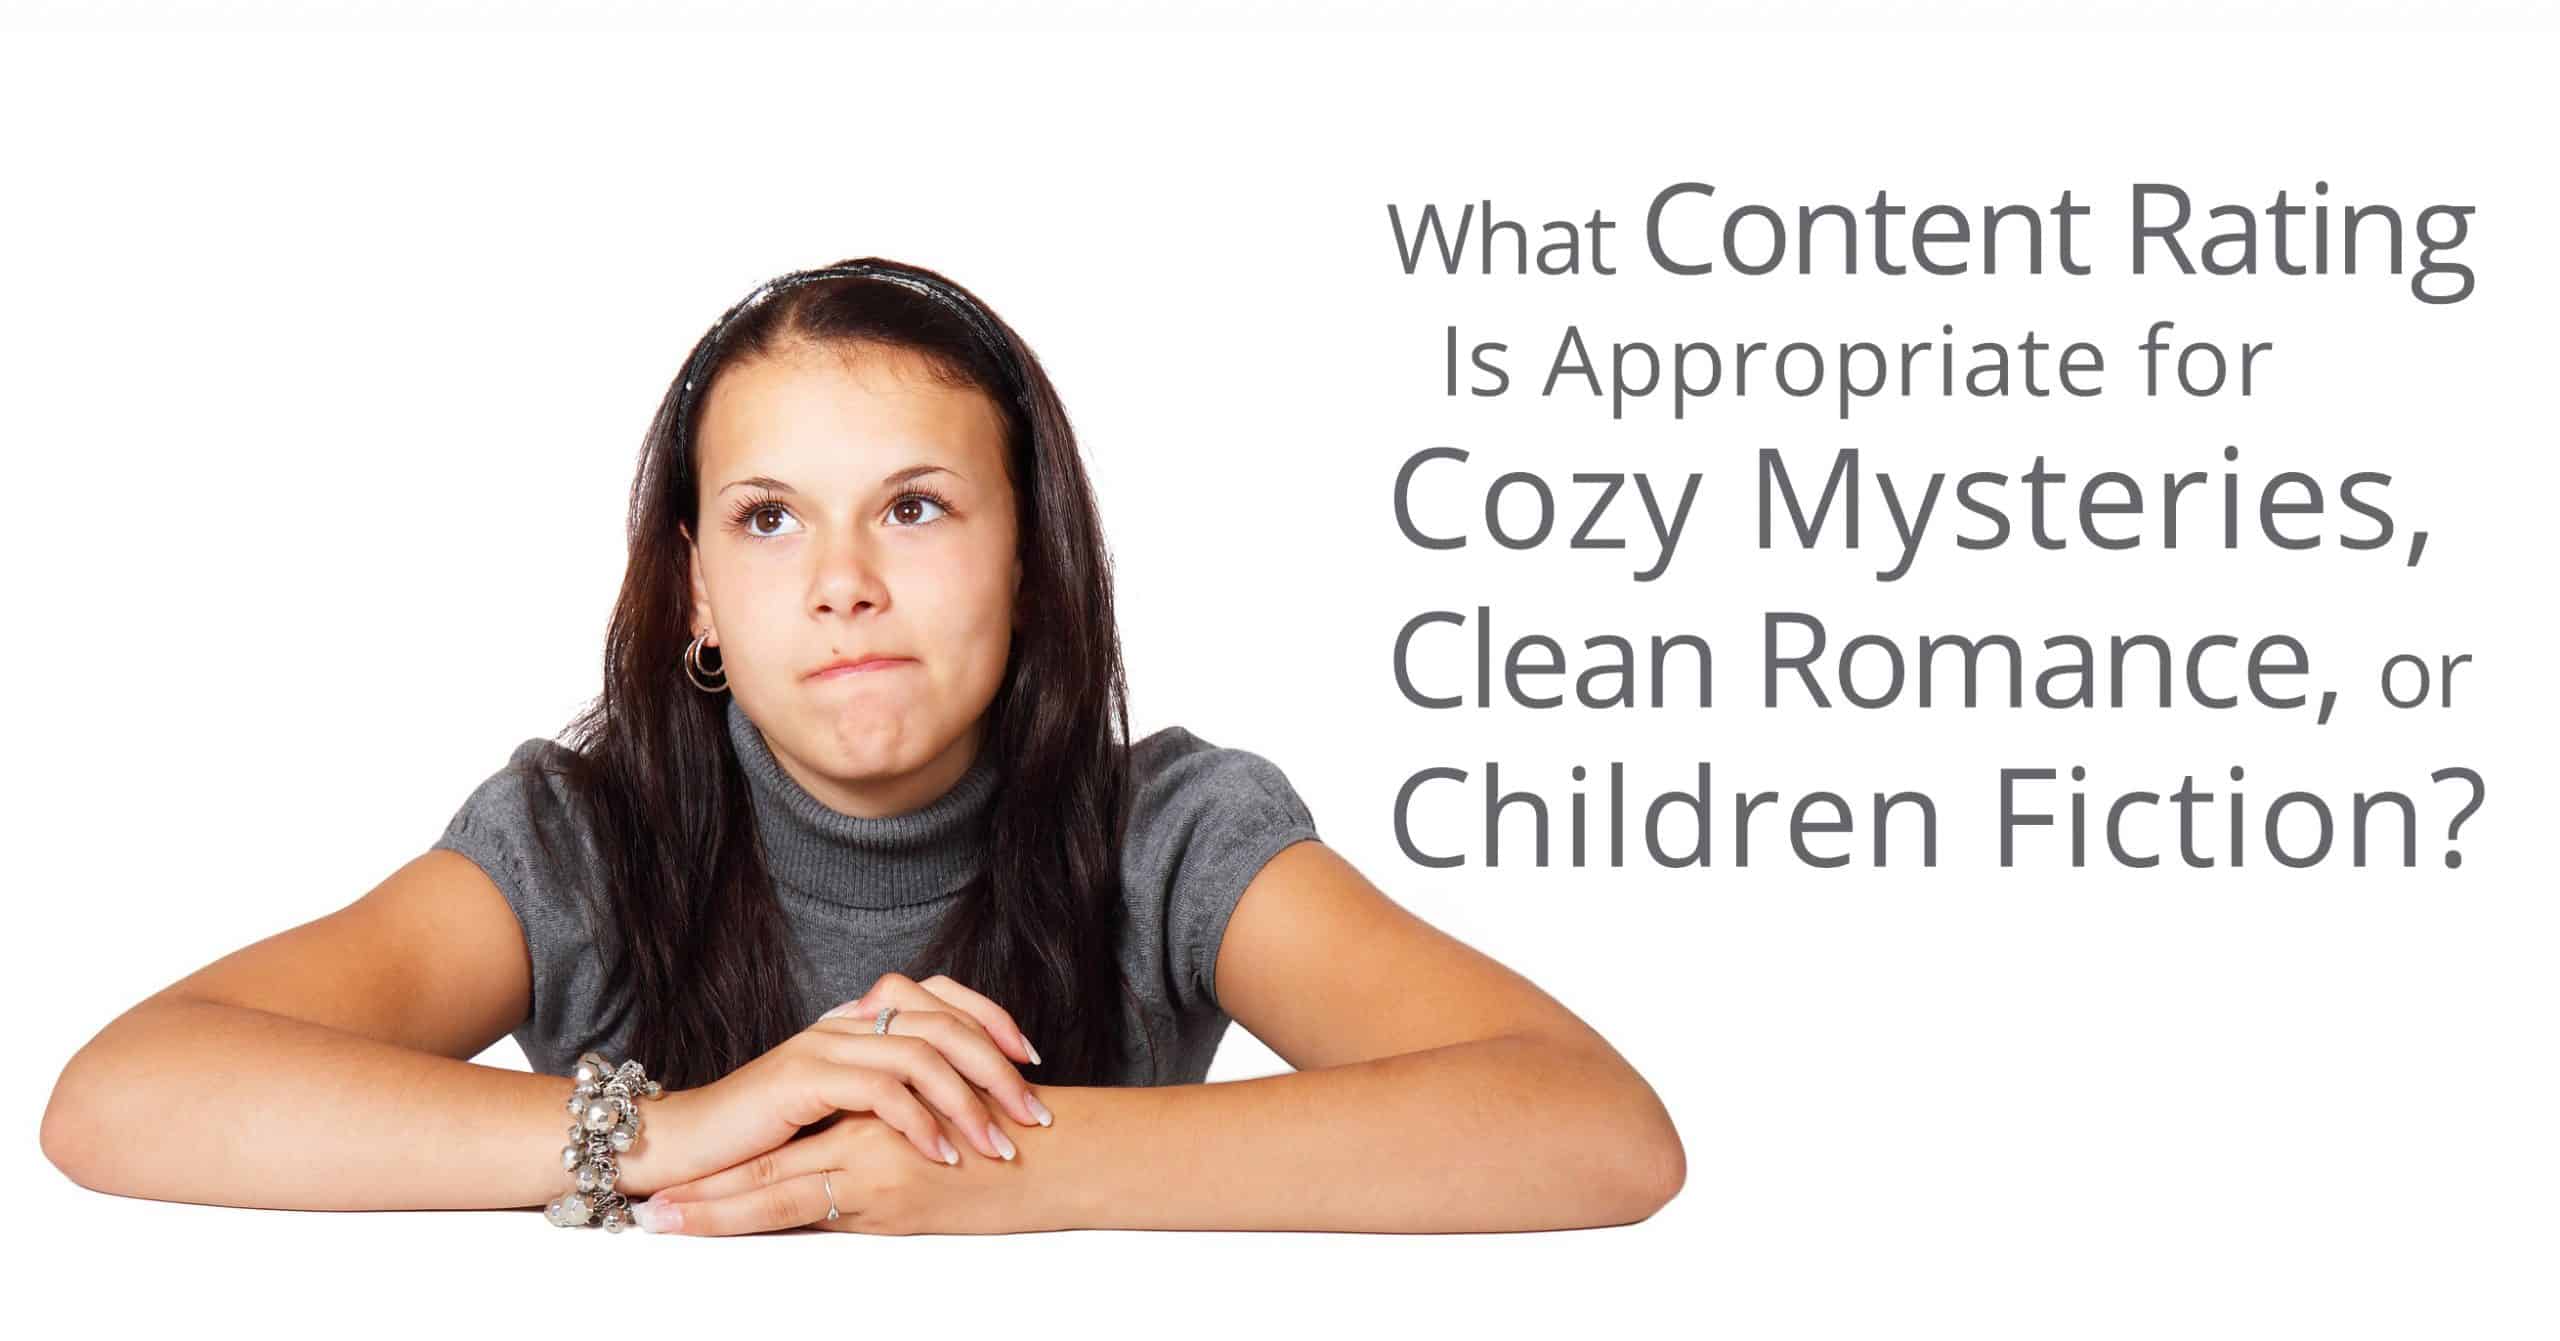 content rating for cozy mysteries, clean romances, and children's books